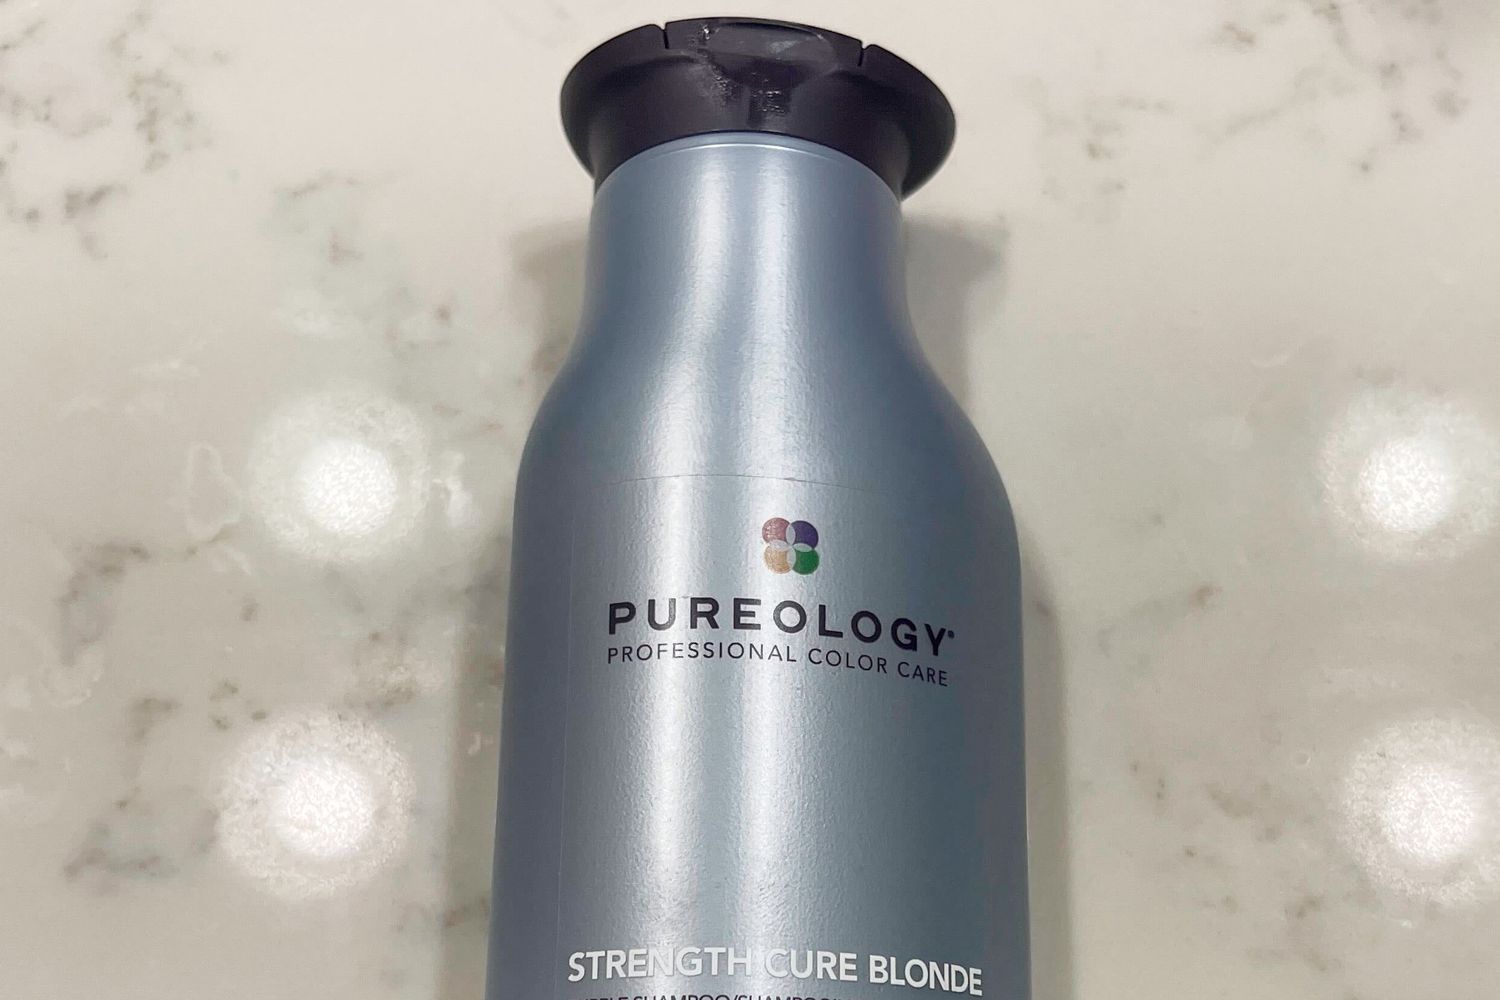 A bottle of Pureology Strength Cure Blonde Shampoo on a marble surface 